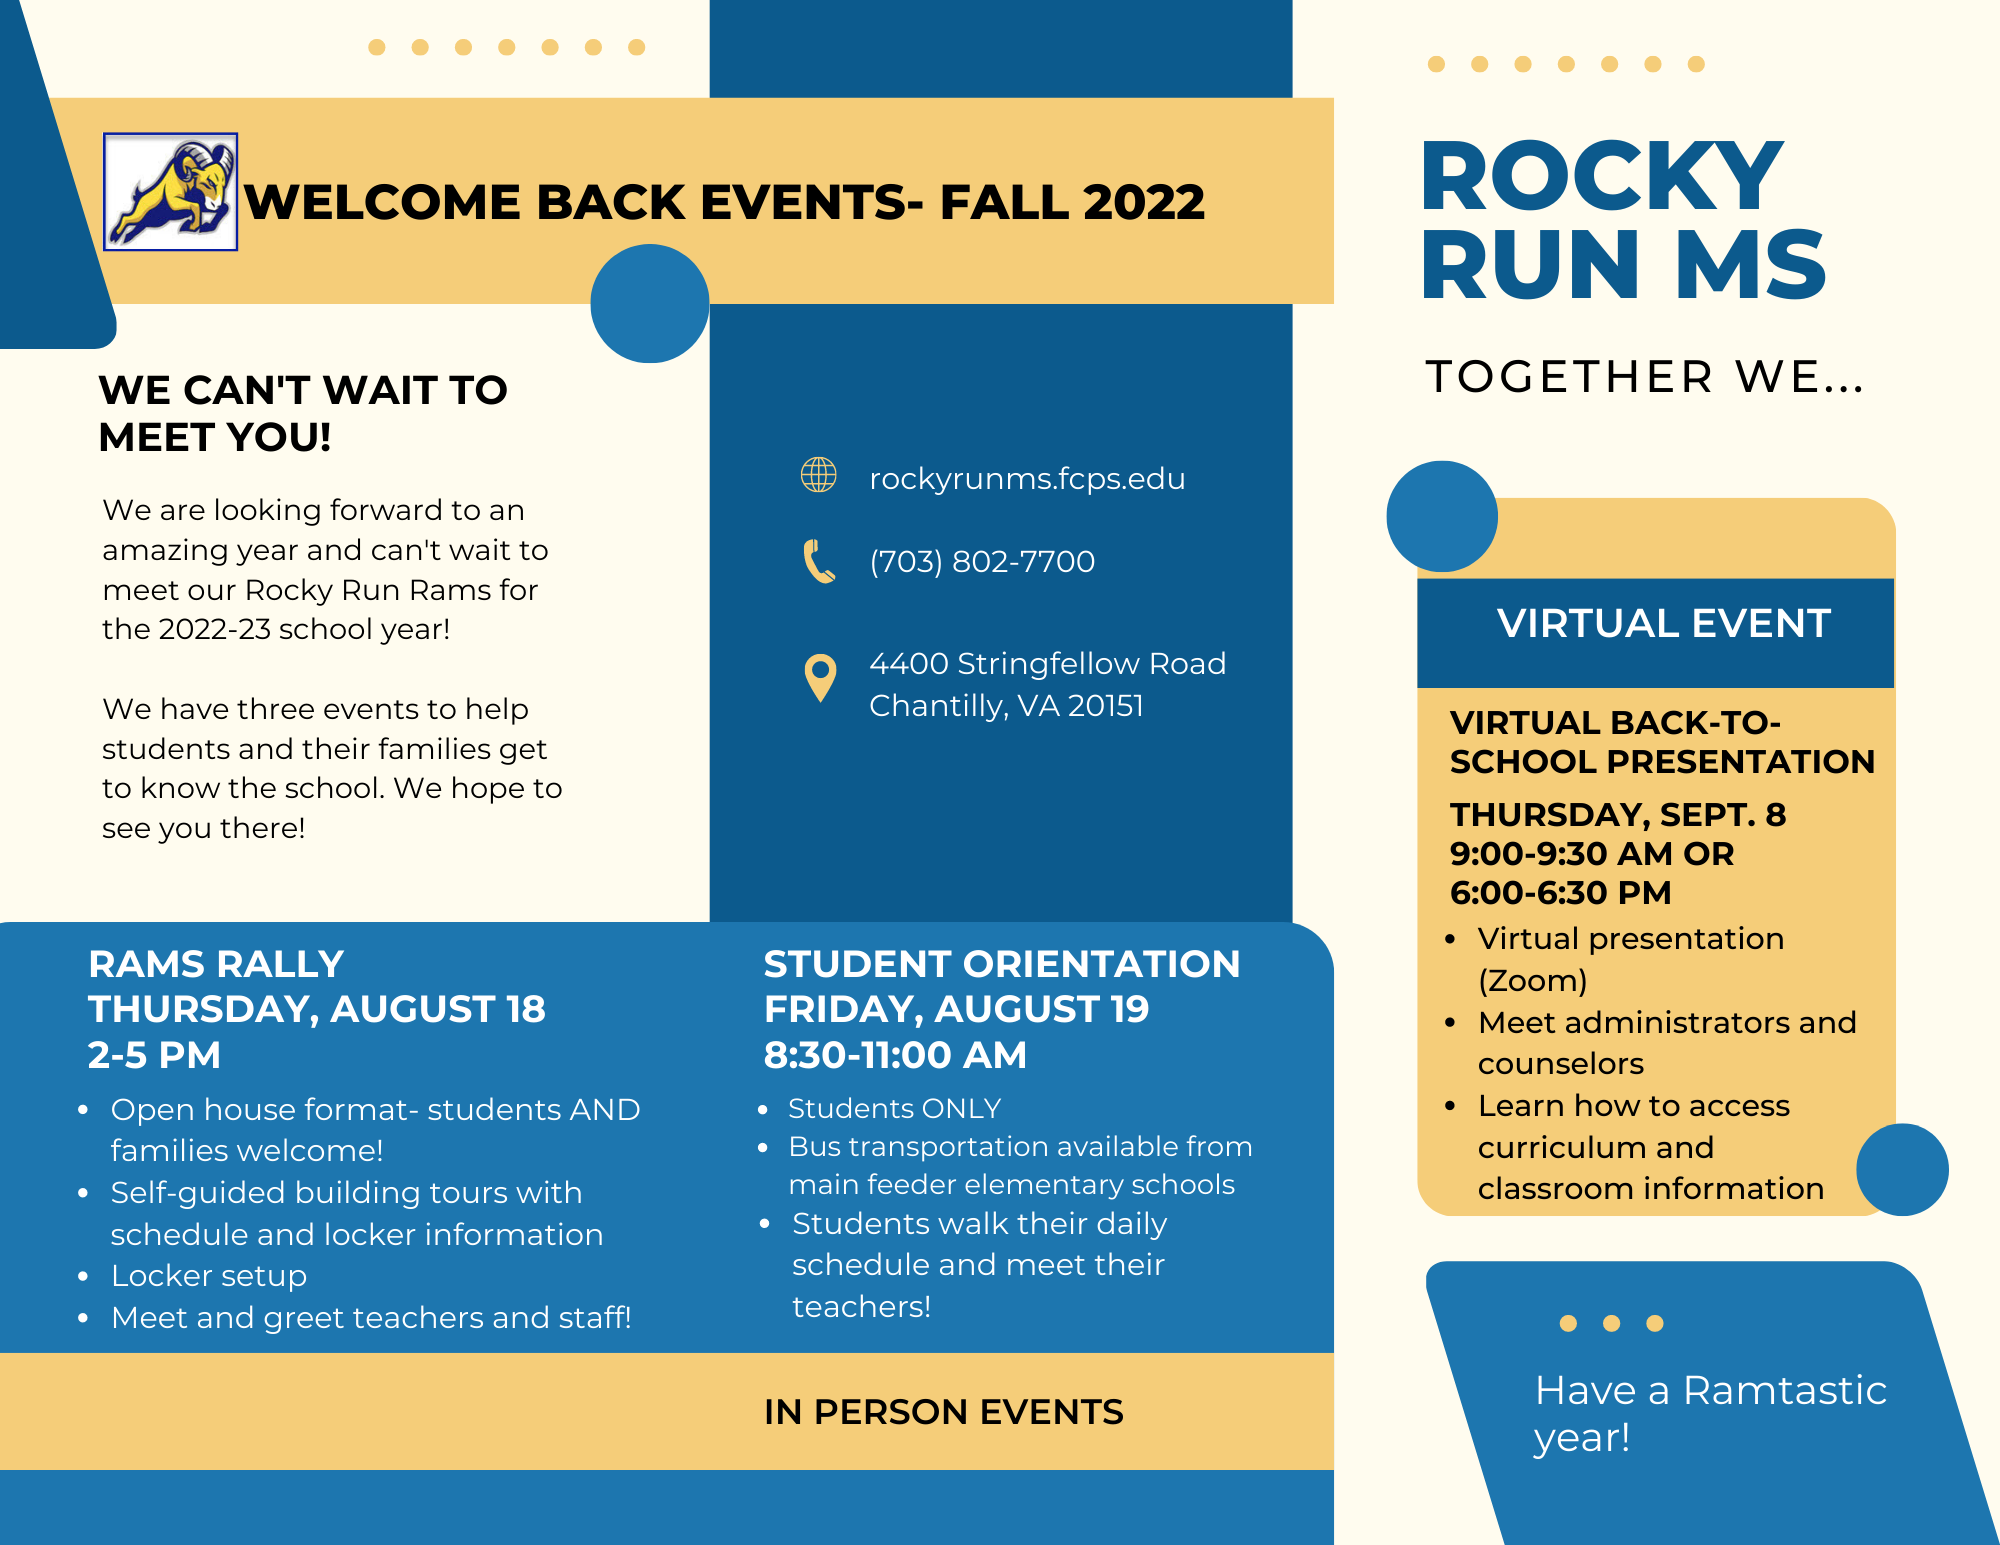 Rocky Run logo and description of back to school events for Rocky Run Middle School.